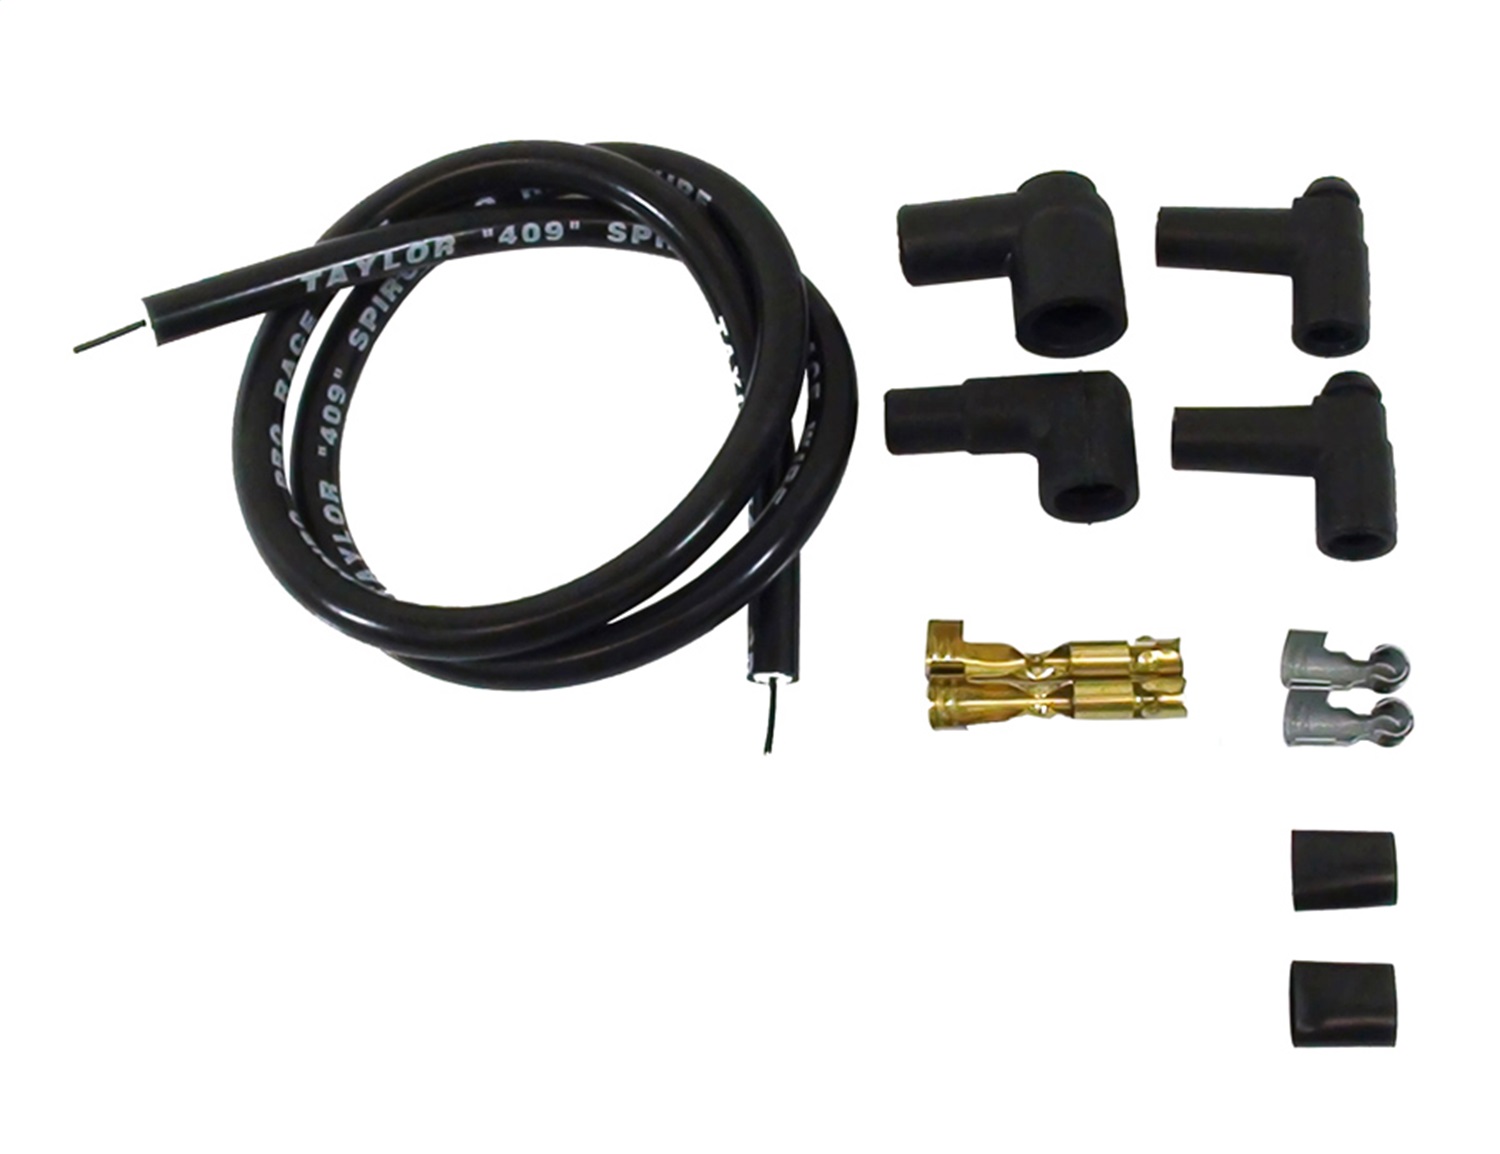 Taylor Cable Taylor Cable 45909 409 Pro Race; Coil Wire Repair Kit